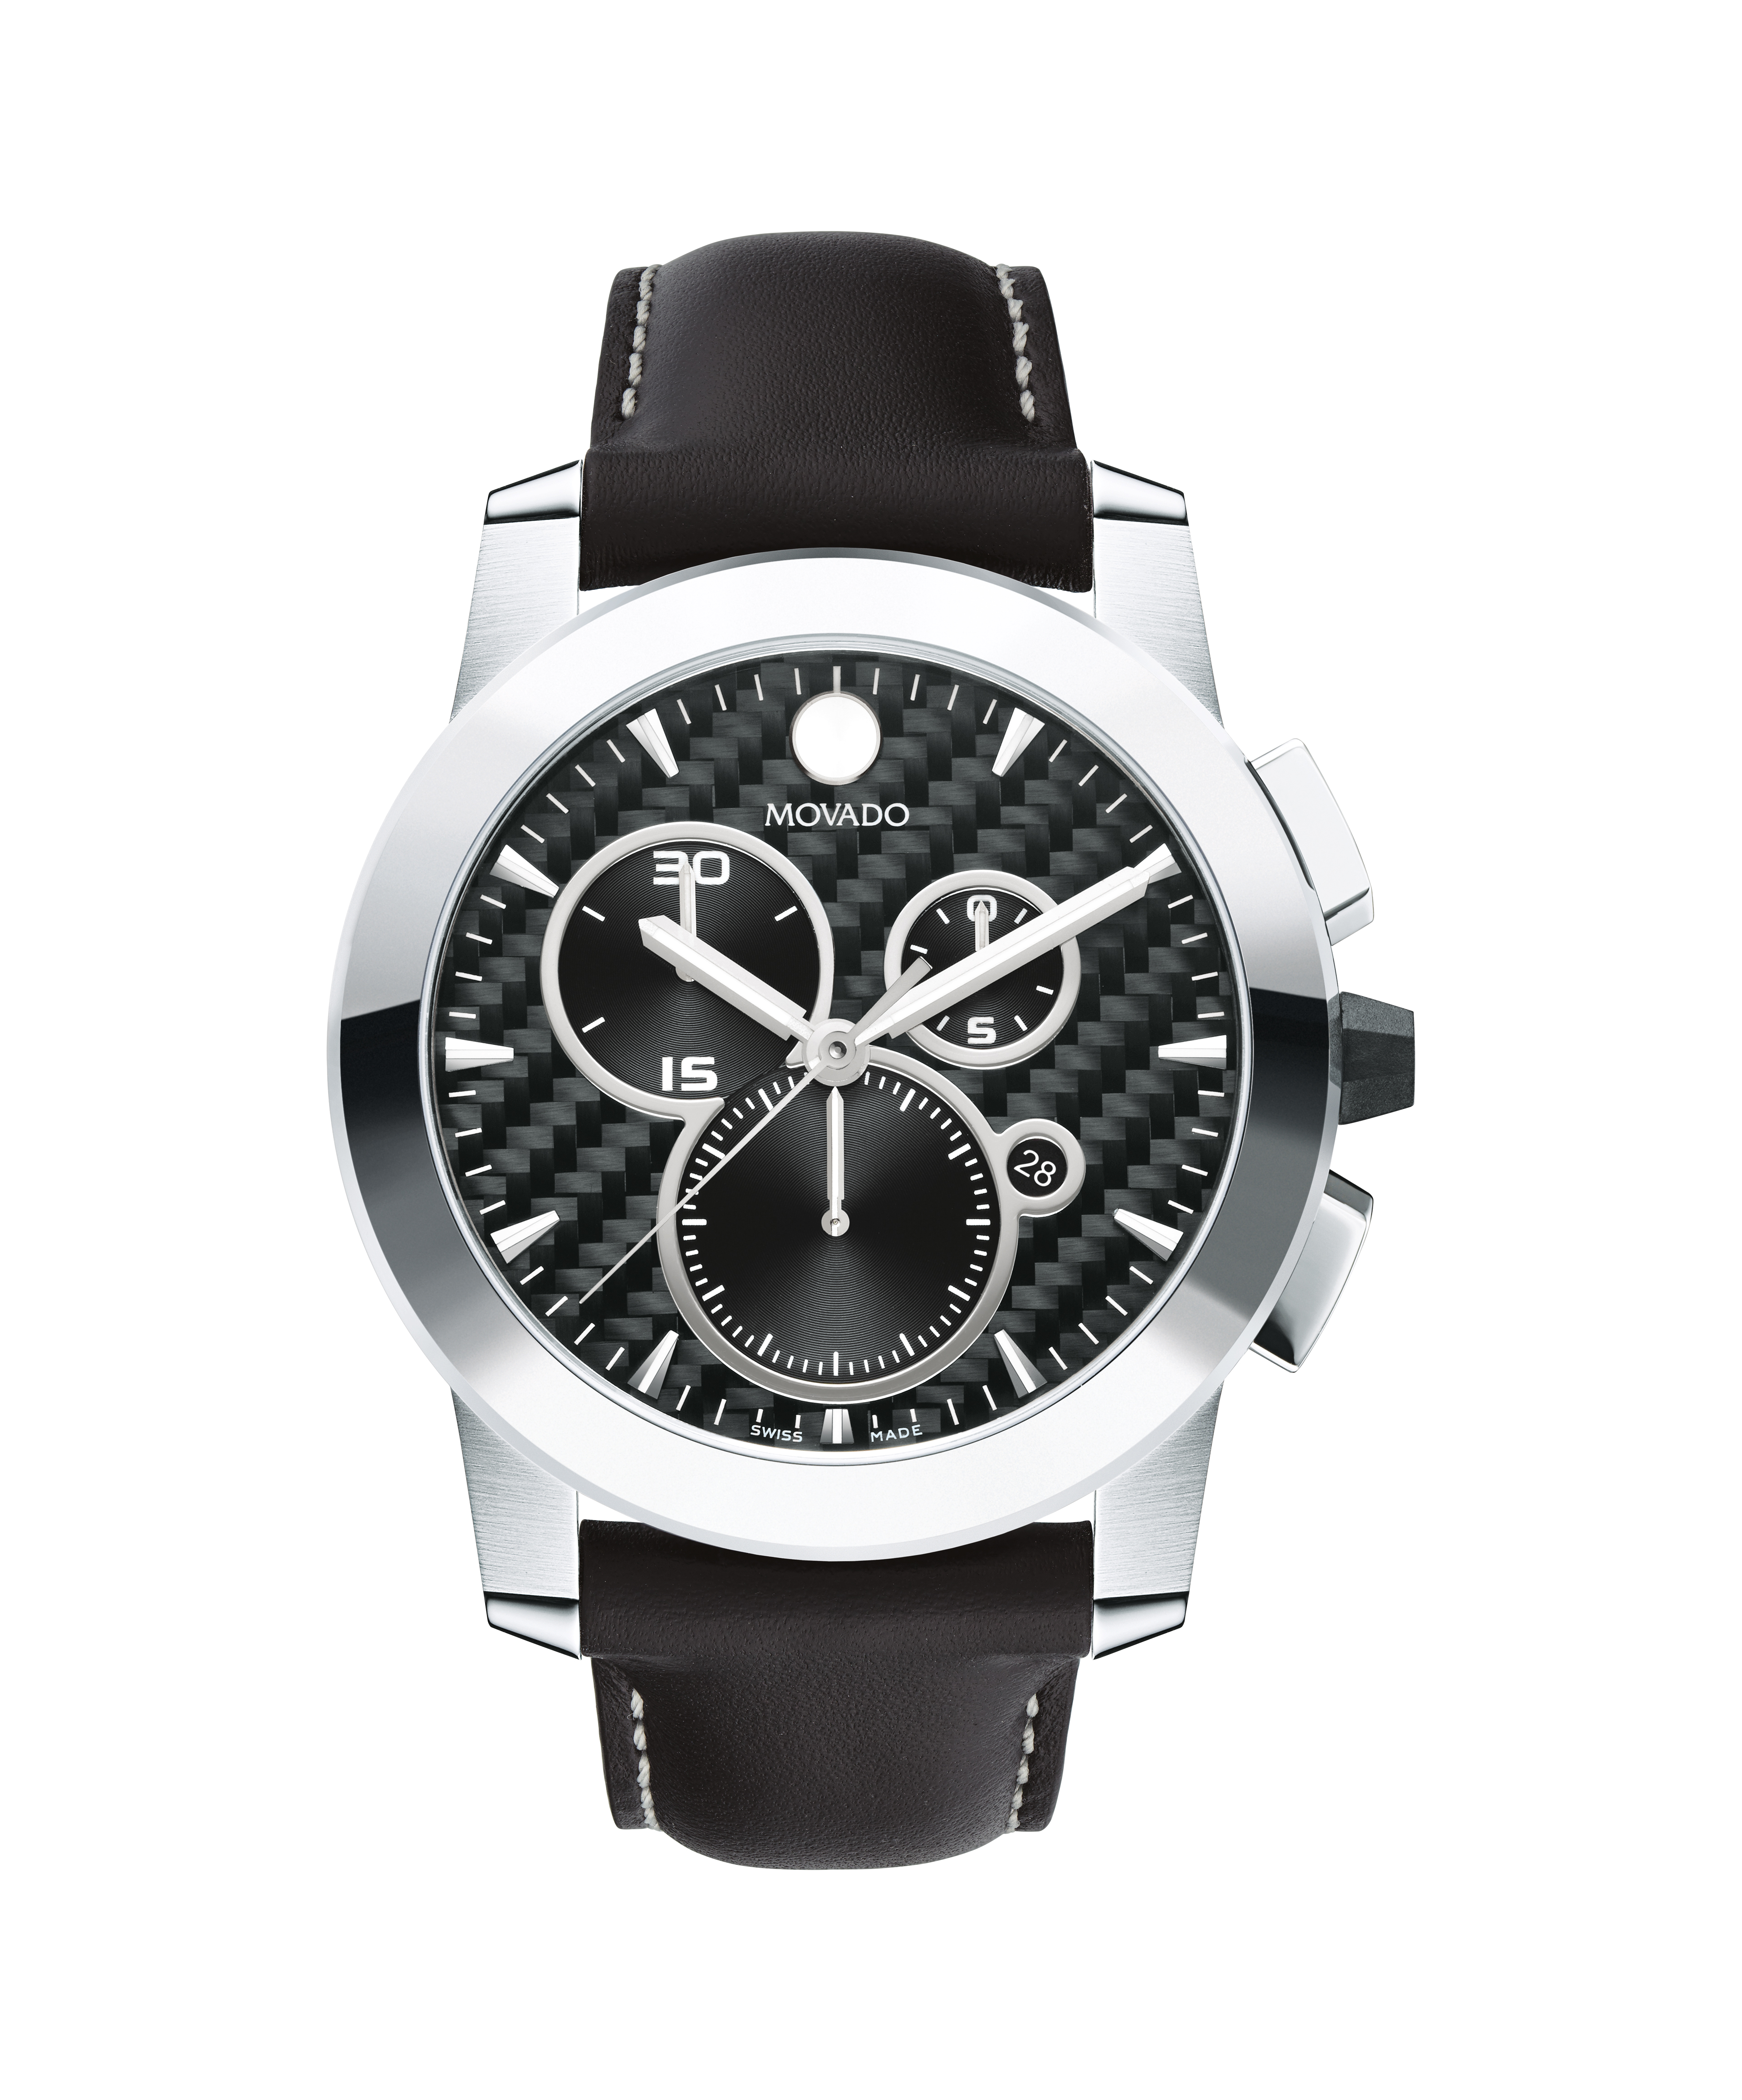 Hollands Movado Online and Vizio Shop Watches- on Rogers